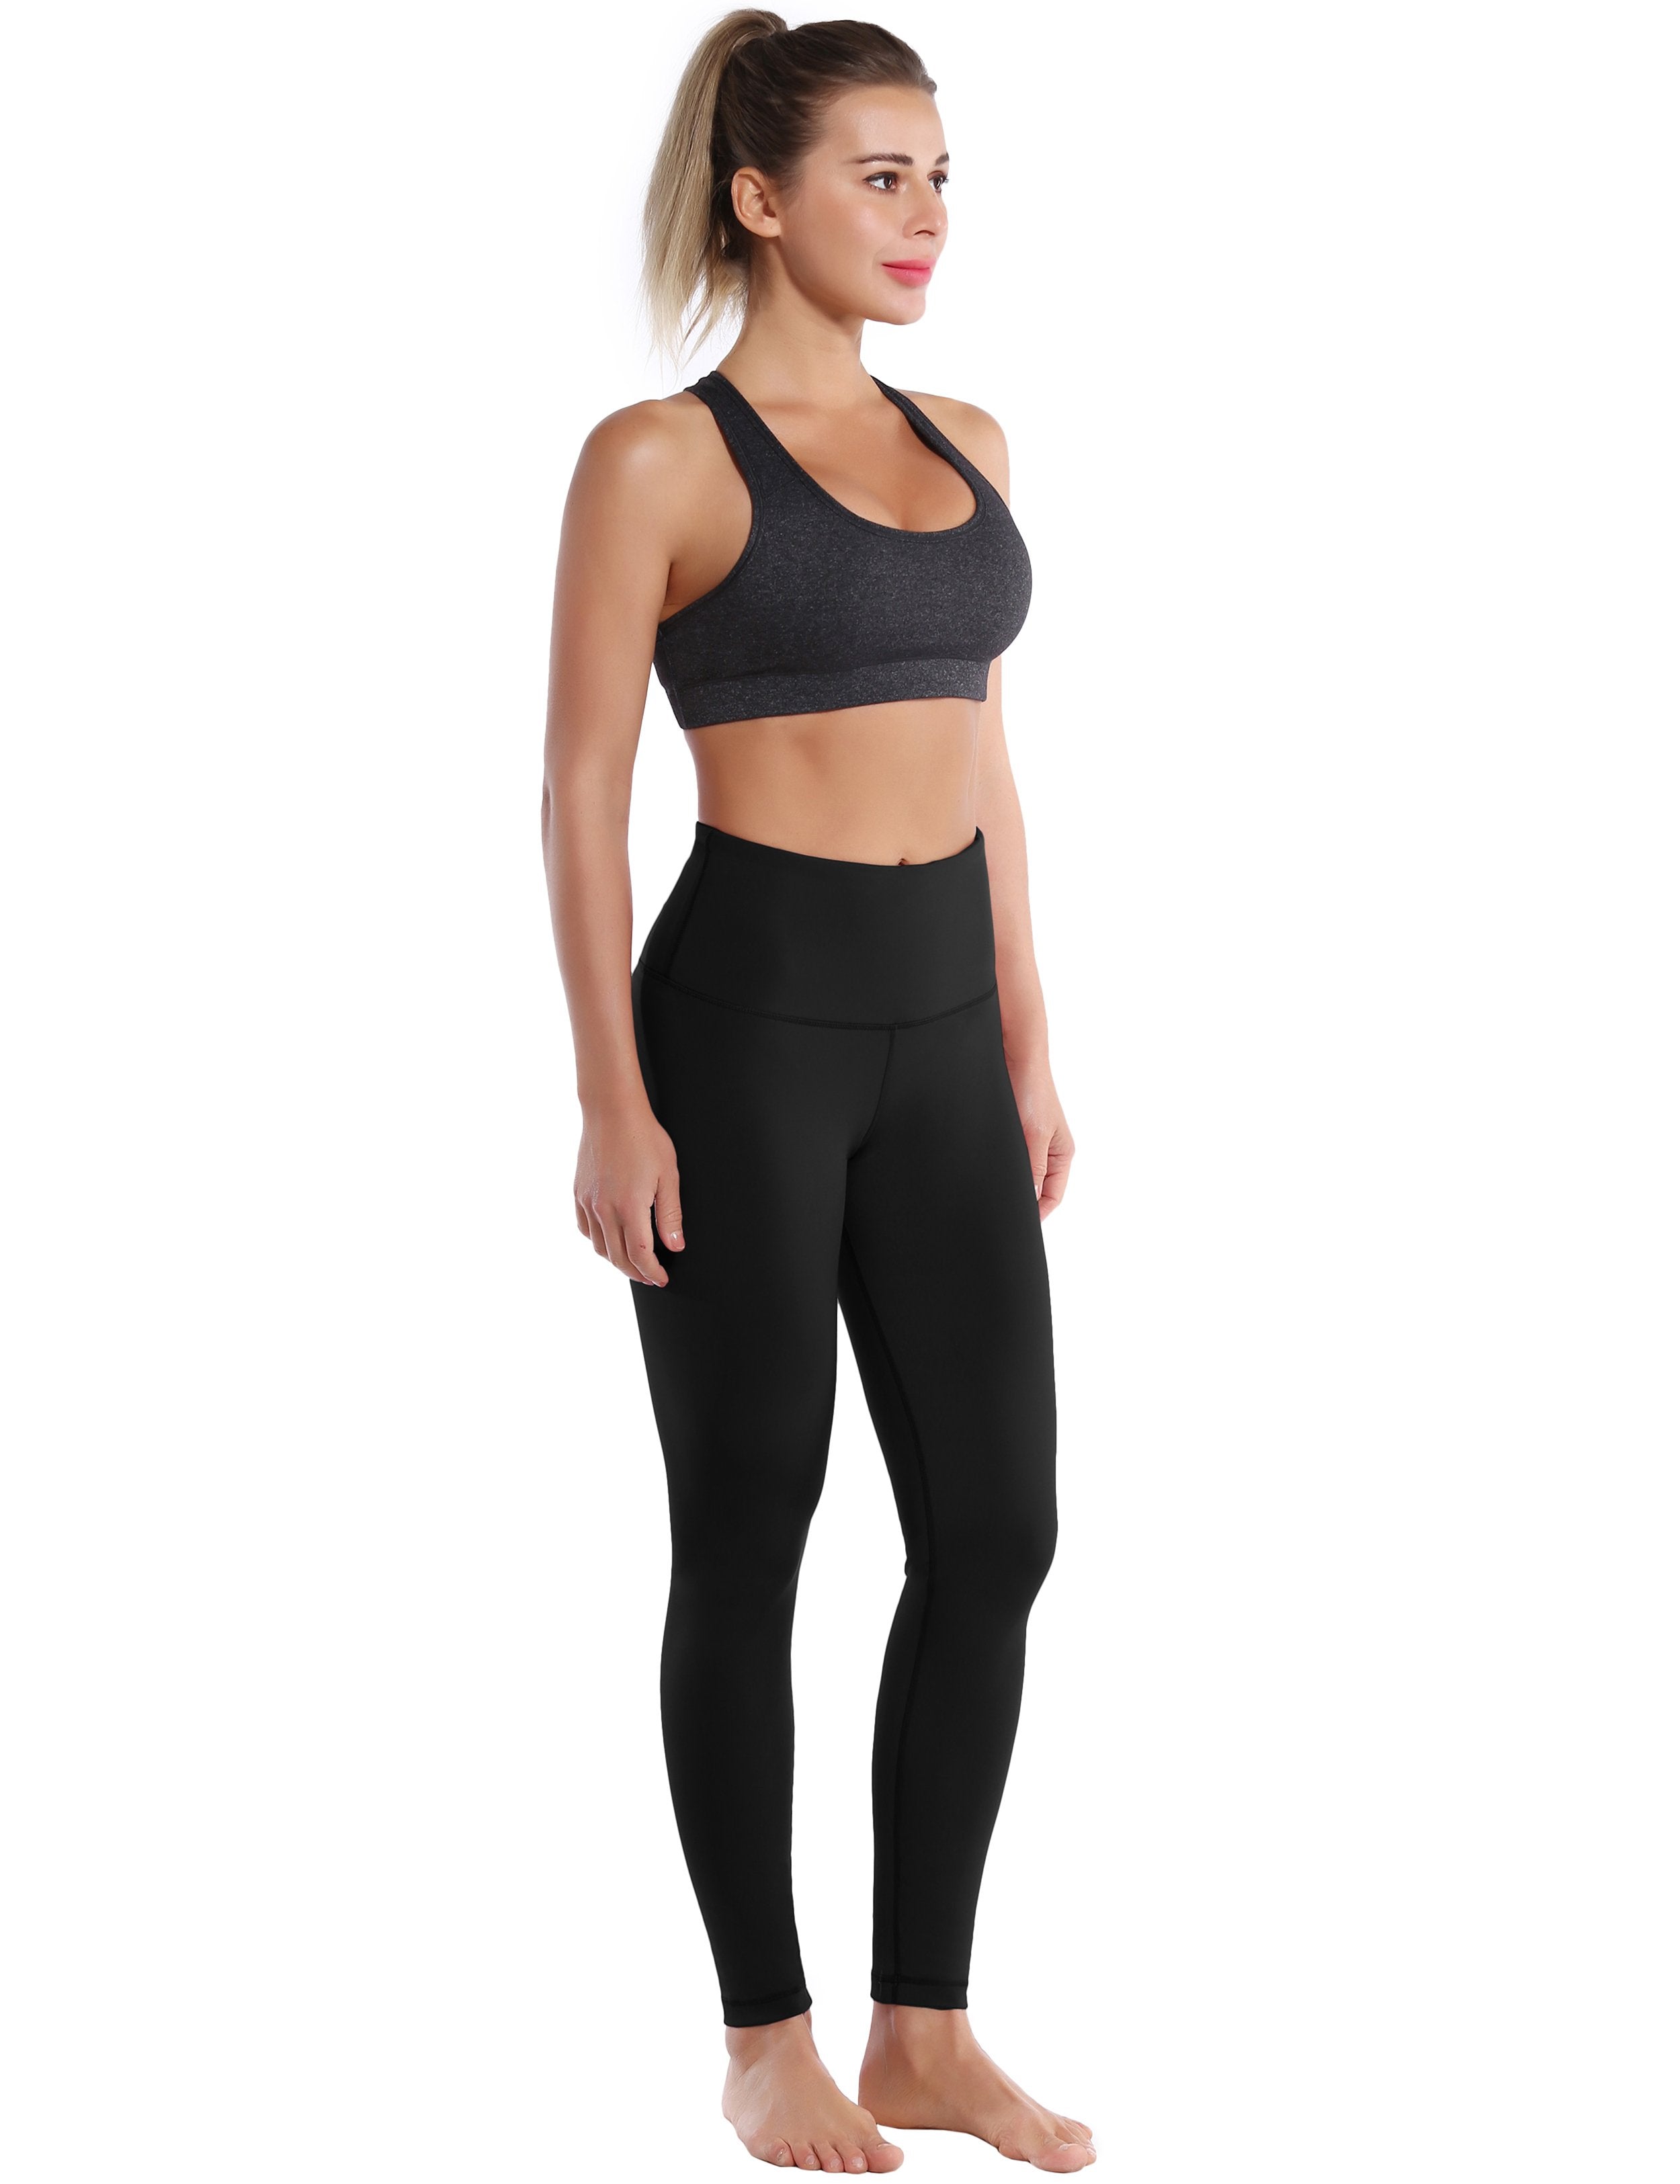 High Waist Running Pants black 75%Nylon/25%Spandex Fabric doesn't attract lint easily 4-way stretch No see-through Moisture-wicking Tummy control Inner pocket Four lengths